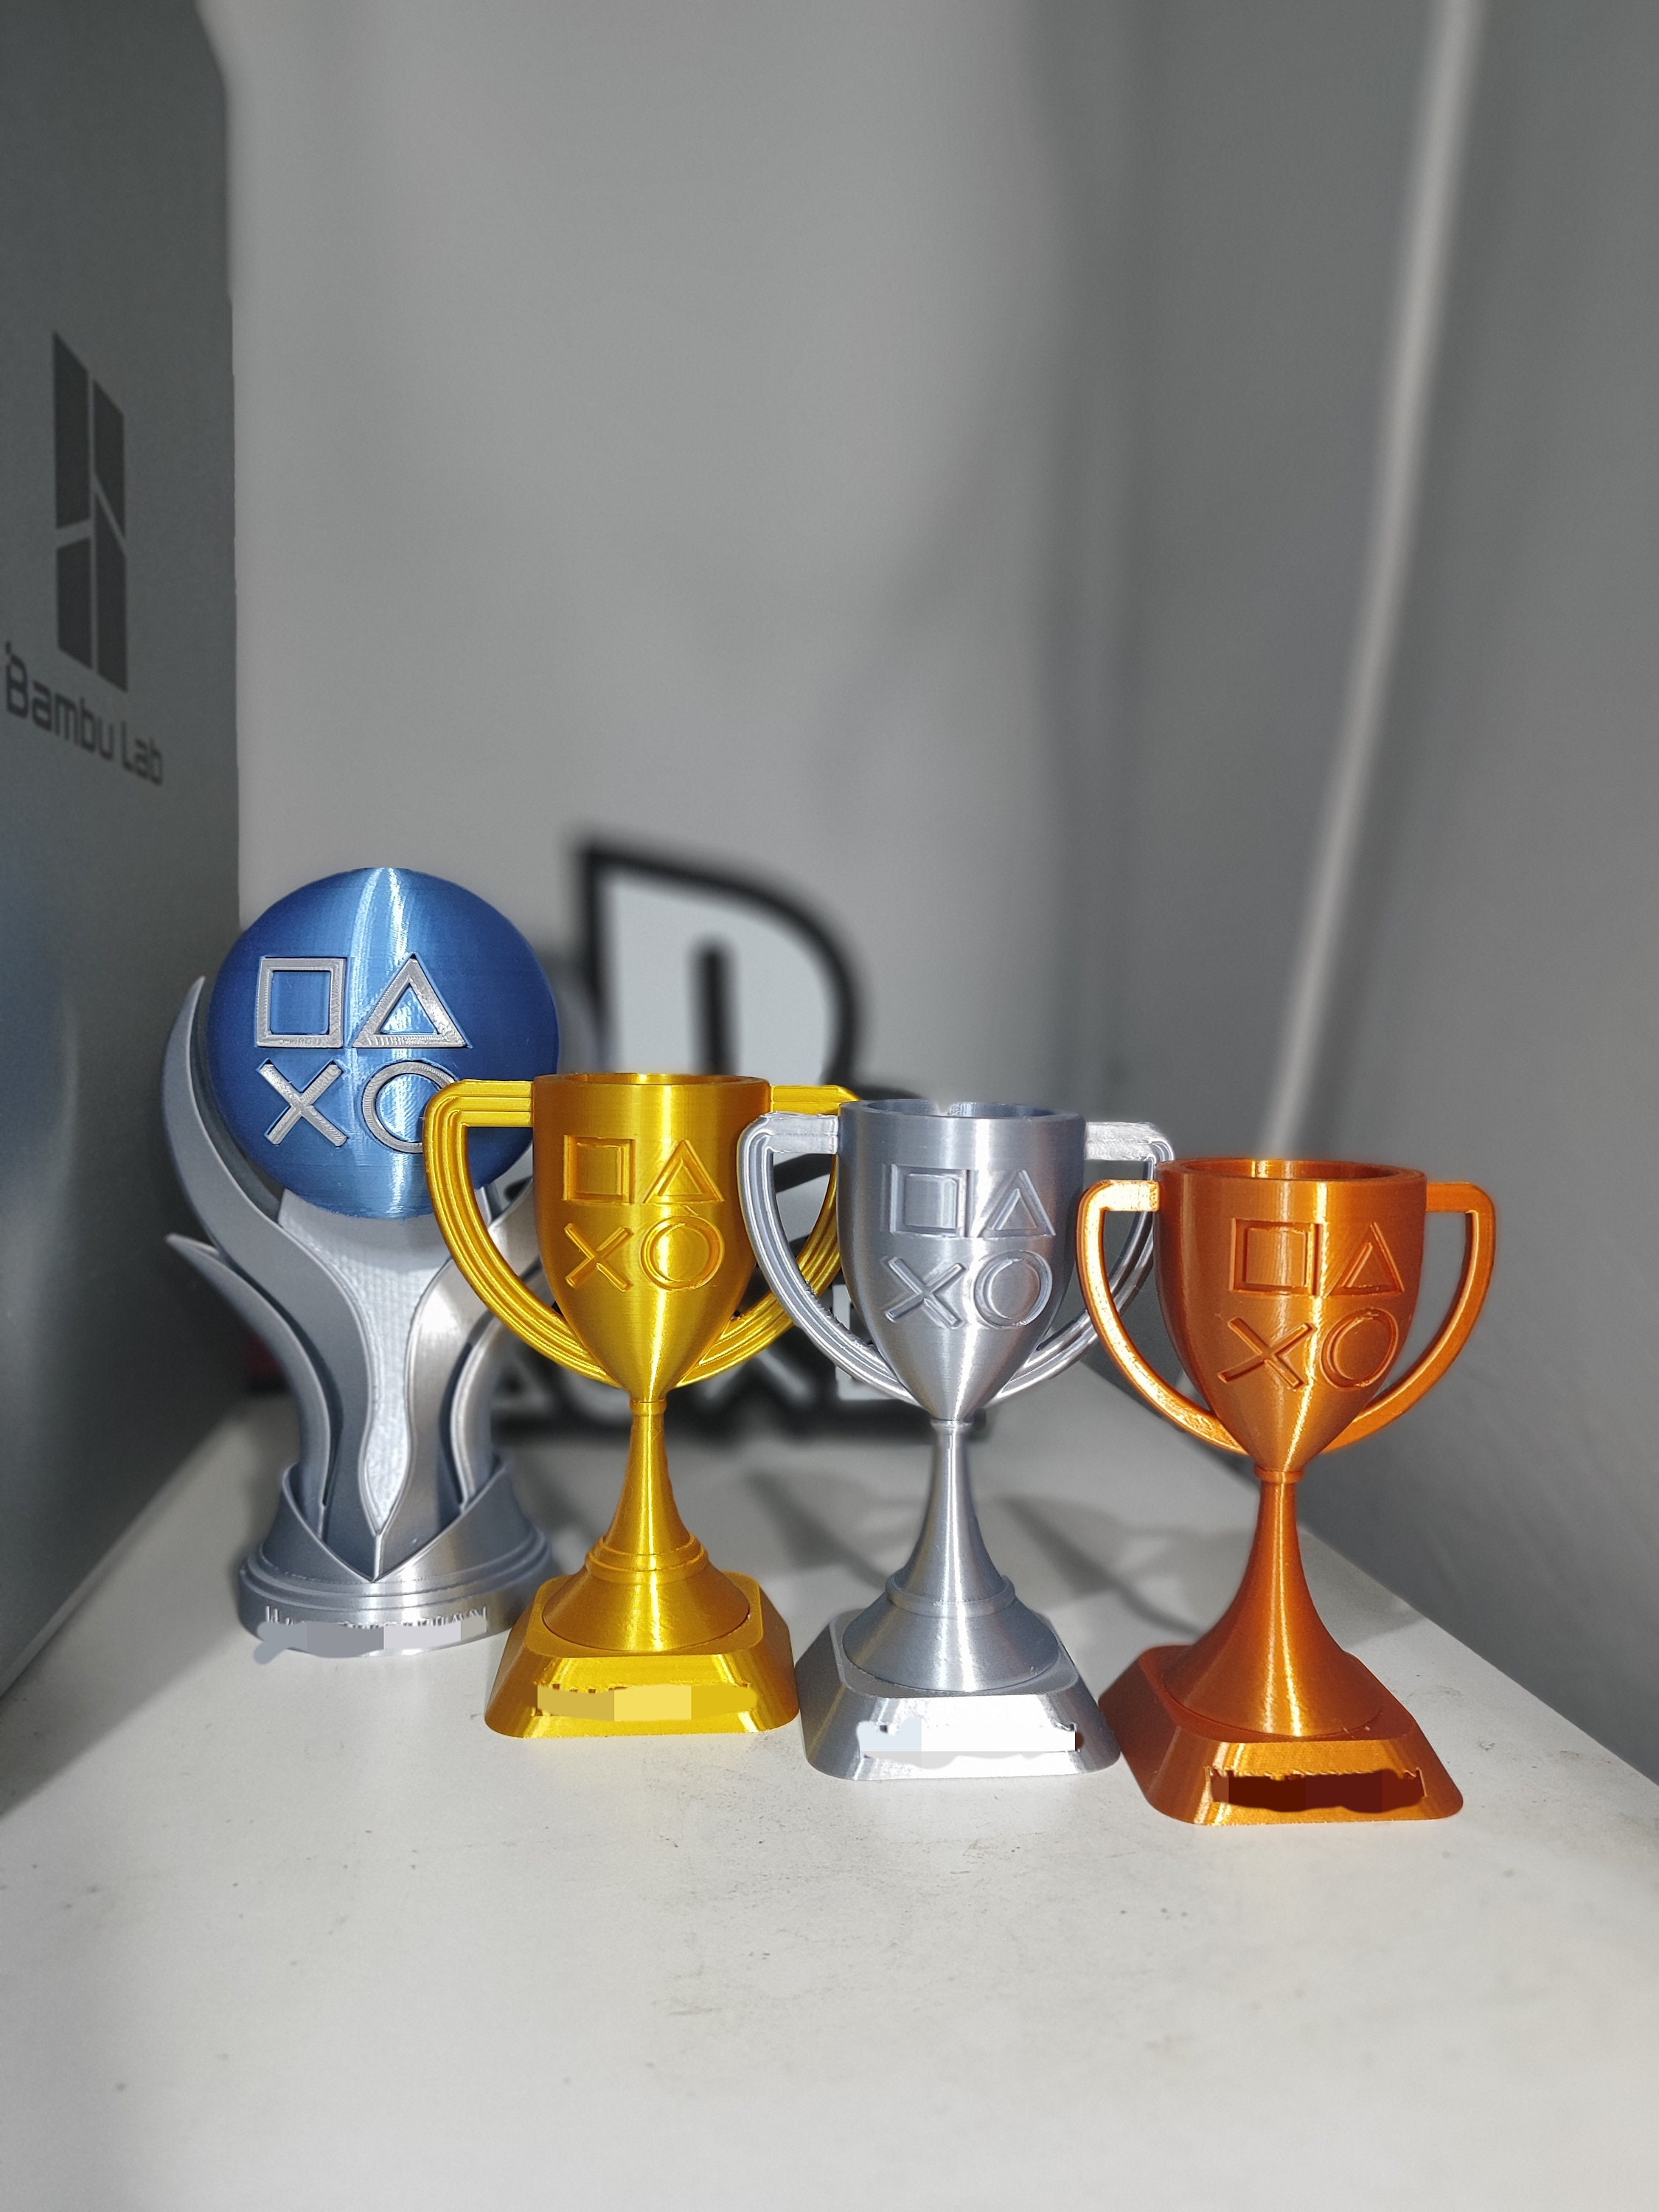 Horizon Forbidden West Trophy Guide: All PS5, PS4 Trophies and How to Get  the Platinum